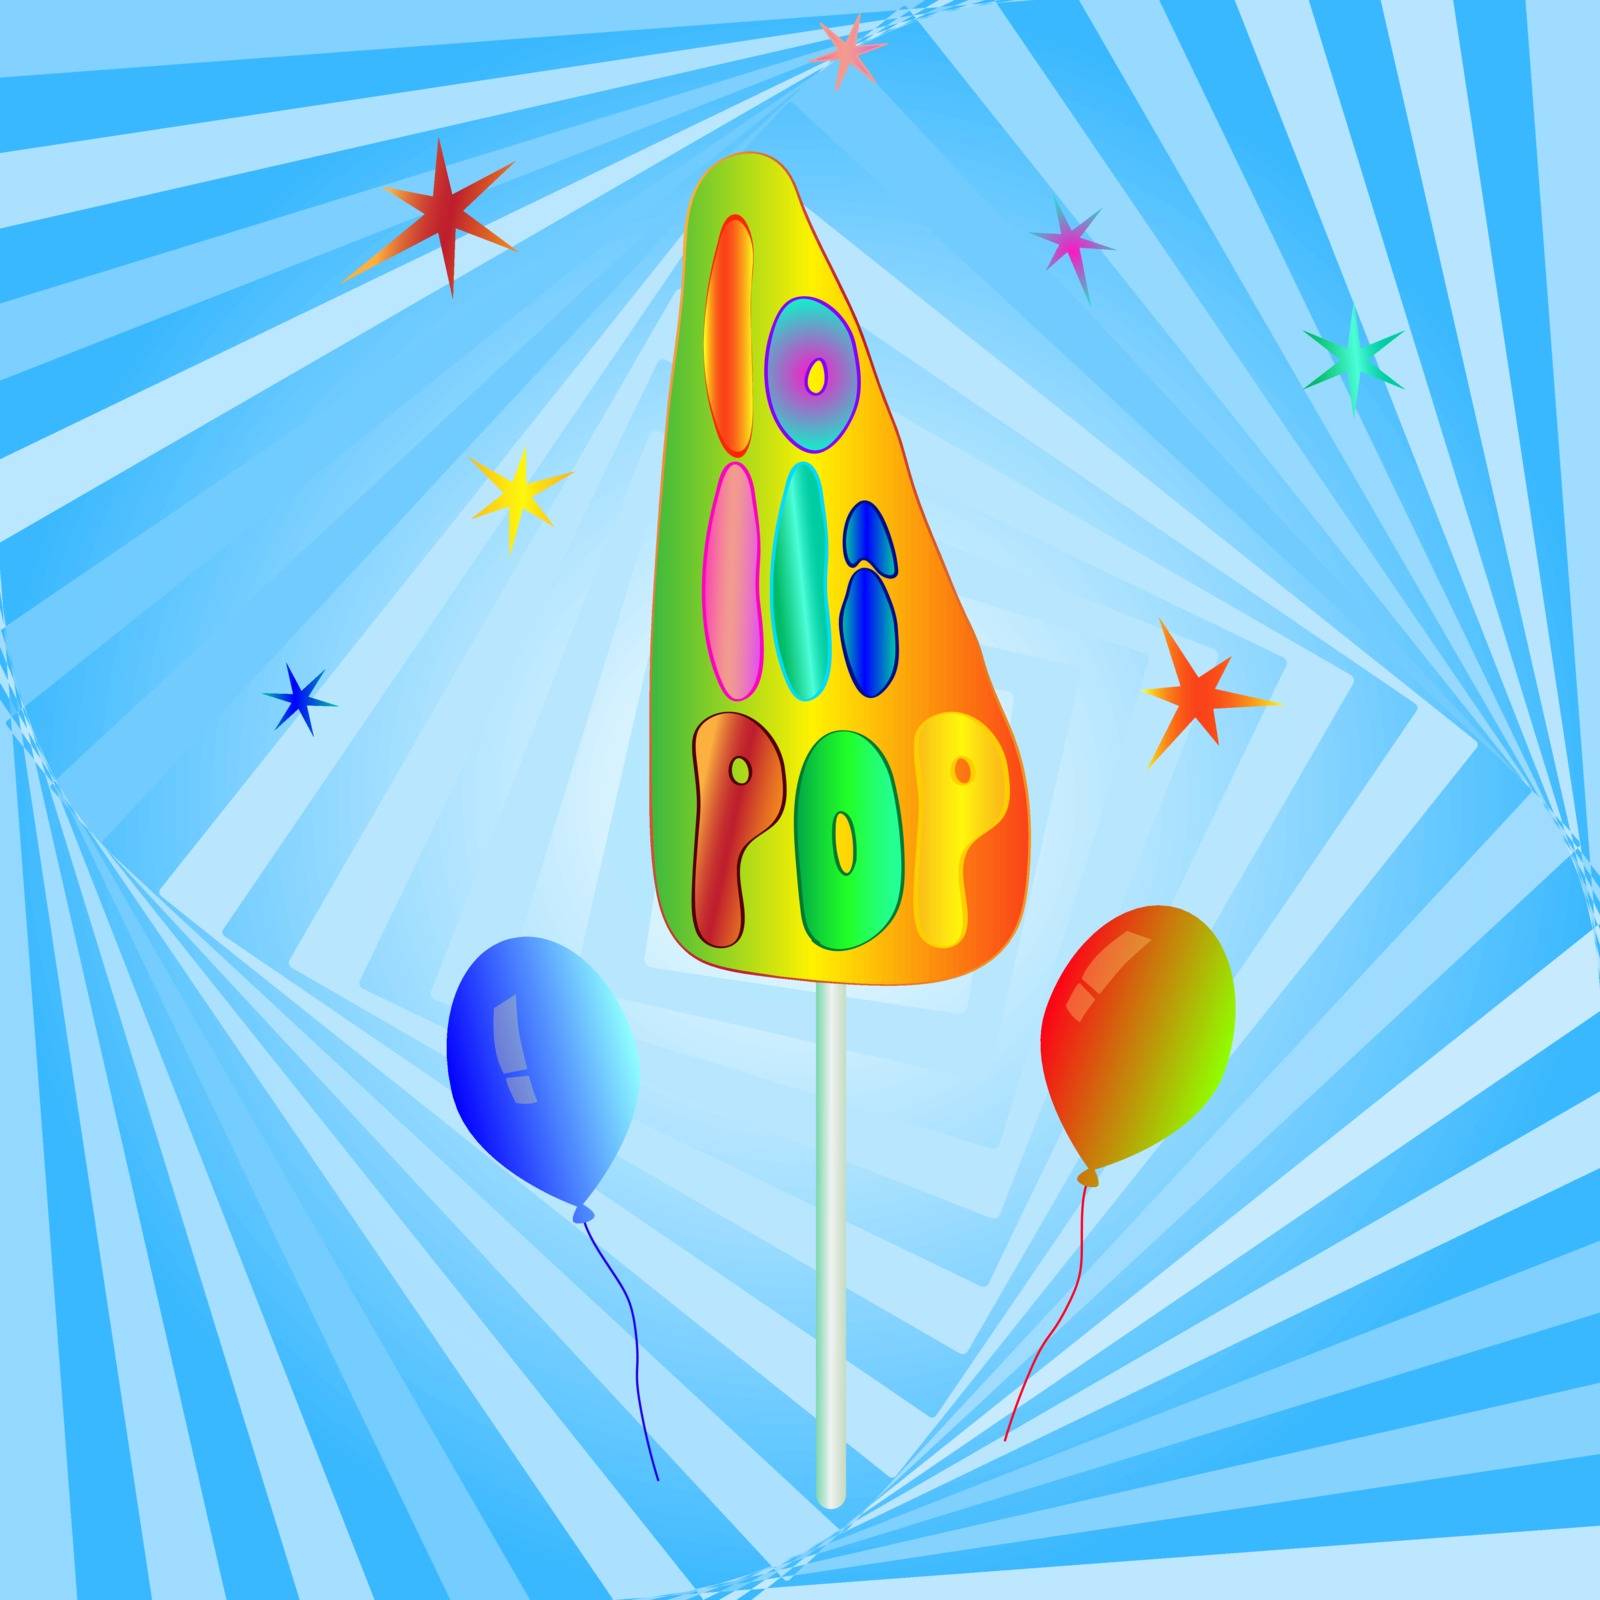 lollipop and balloons on a bright blue background